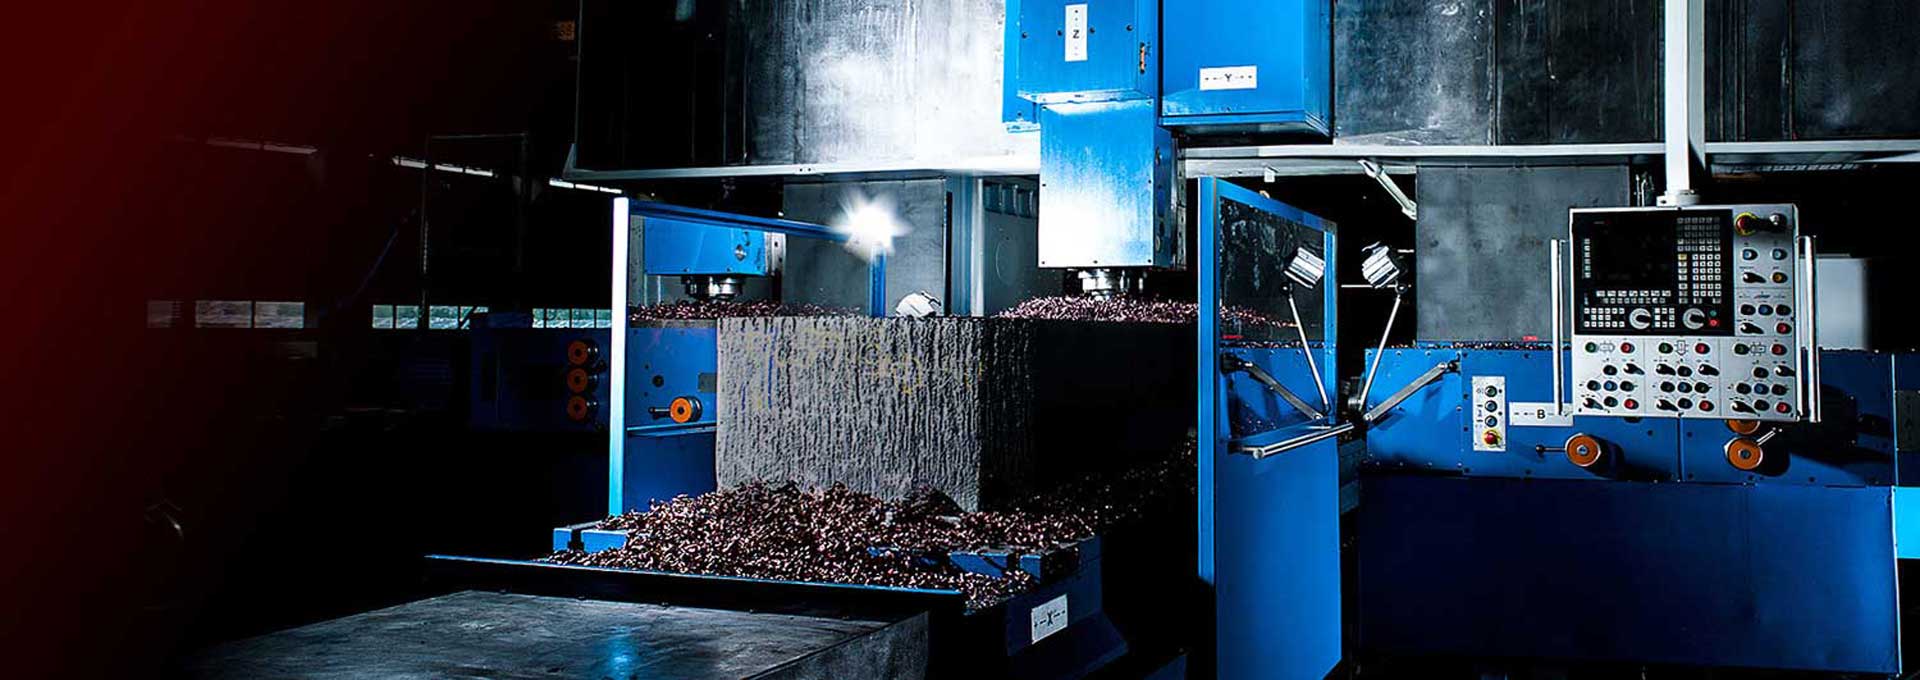 Processing steel cuts – from milling, drilling to turning